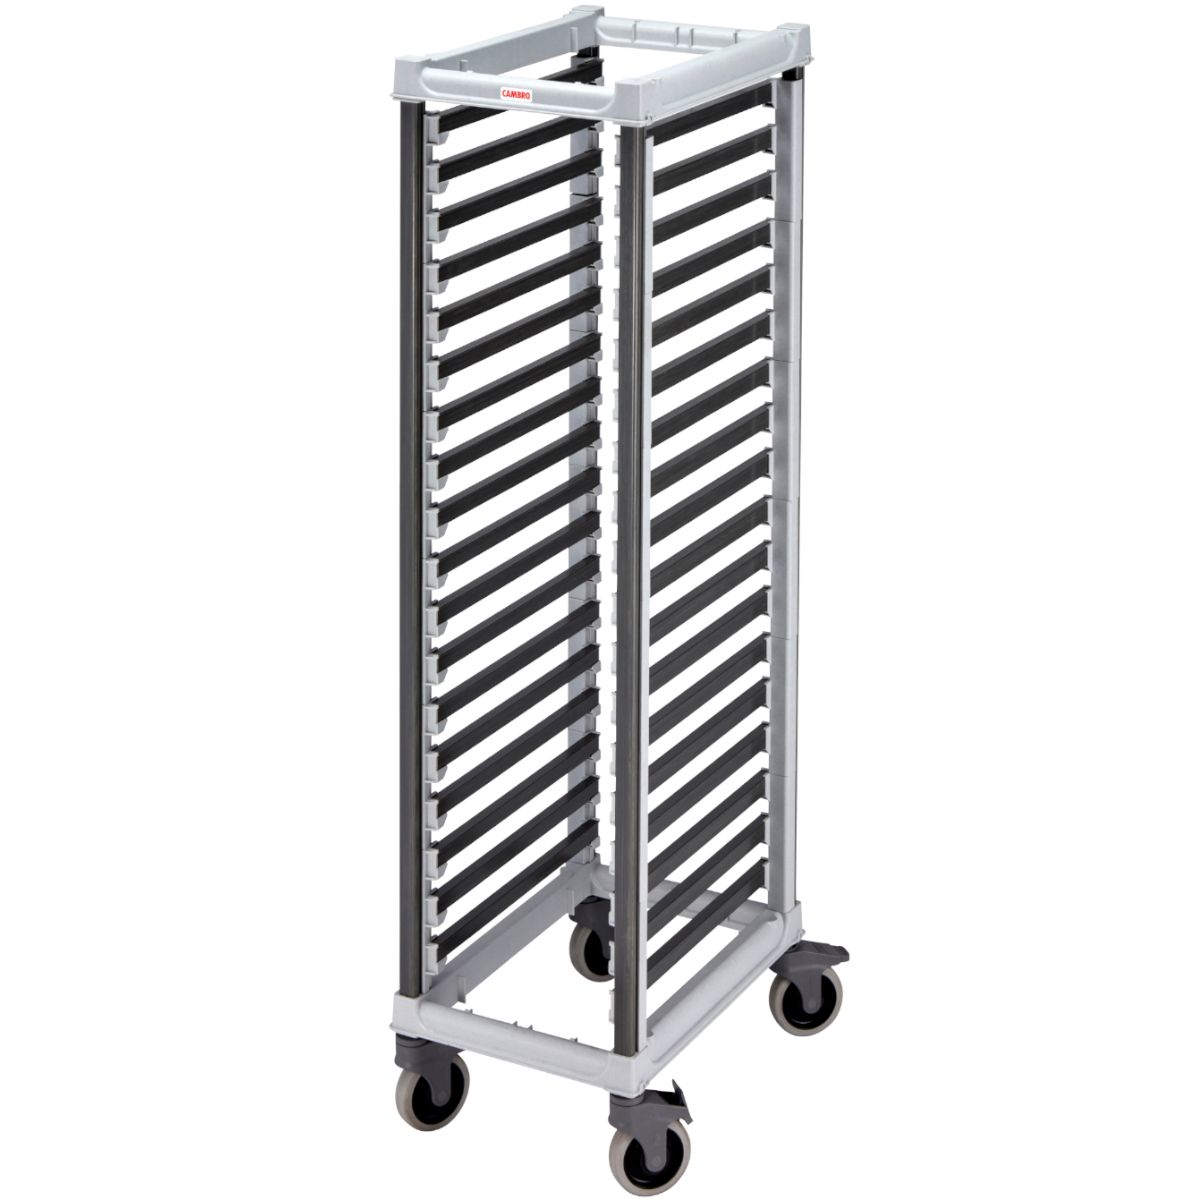 Stainless Steel Food Trolleys to fit 2/1 Gastronorm trays. 